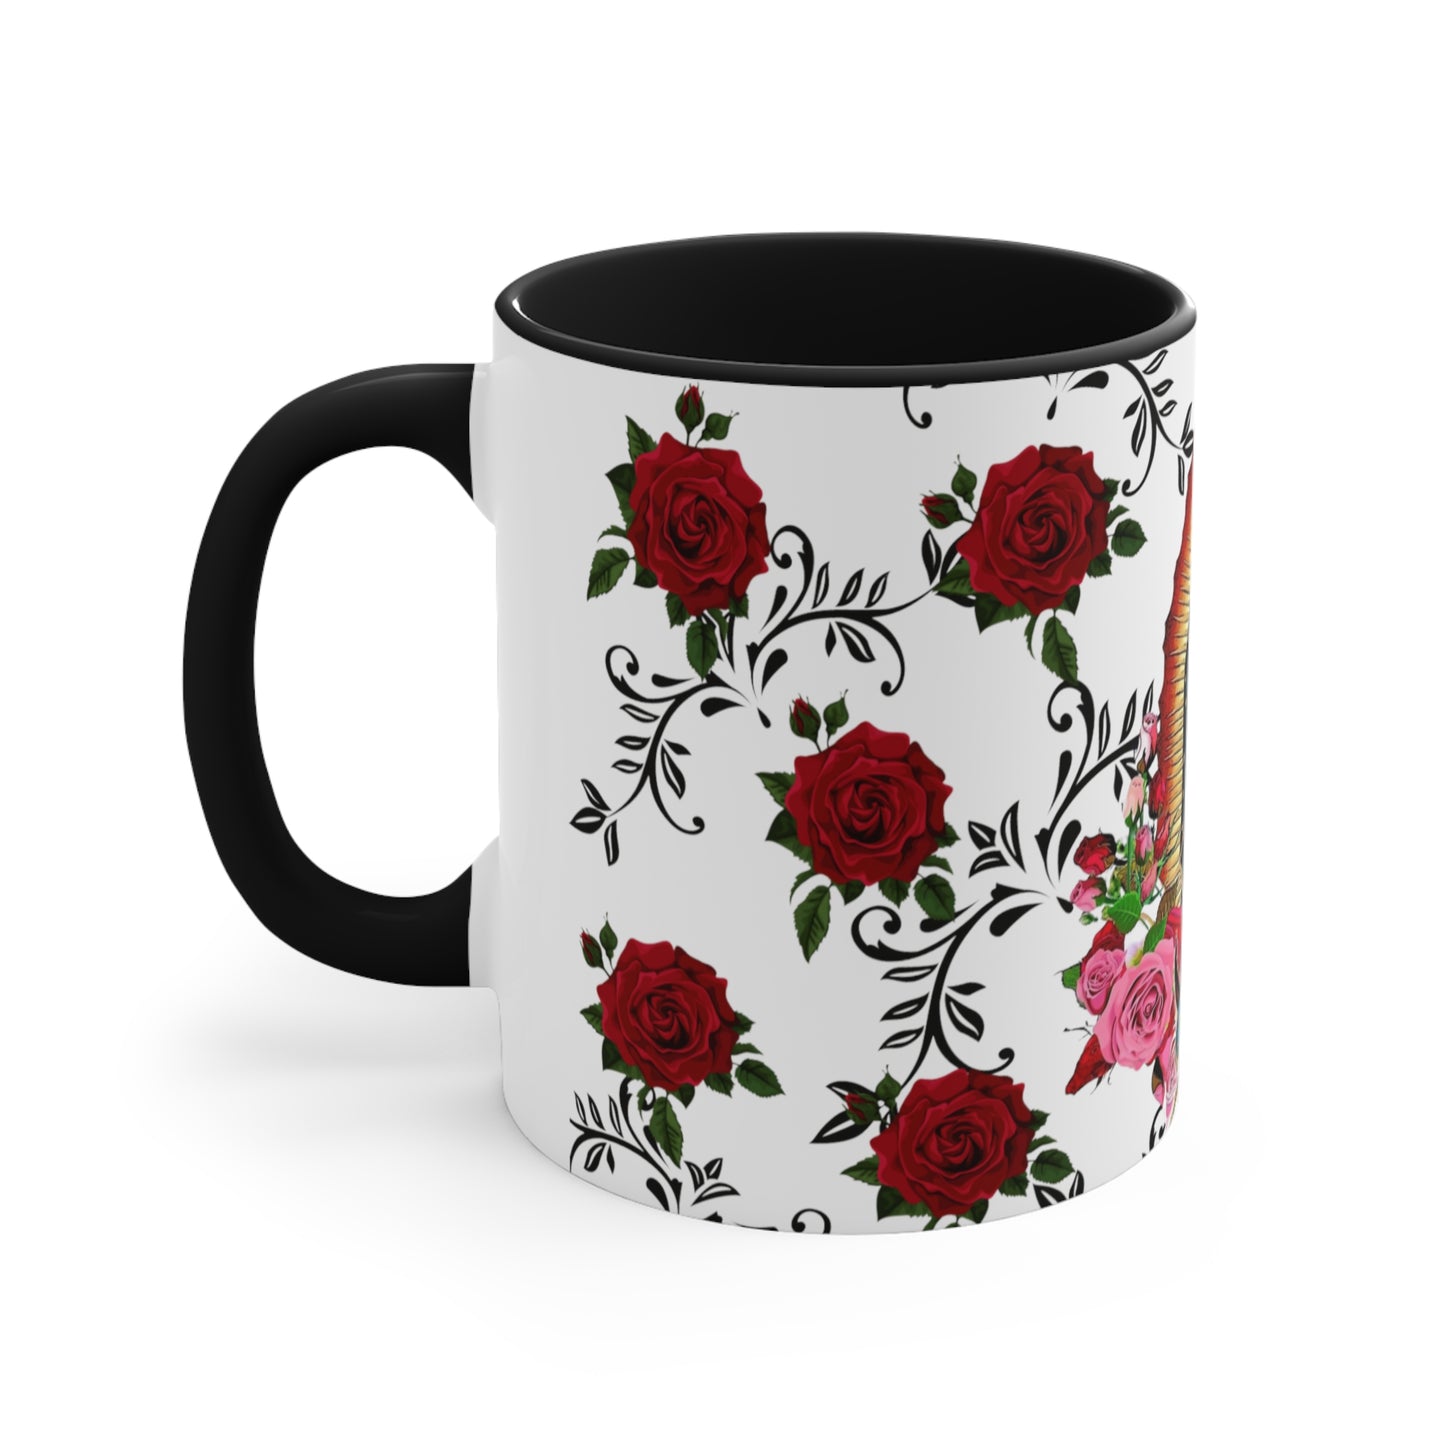 Virgen de Guadalupe Coffee Mug, 11oz. Lady guadalupe with roses and leaves.